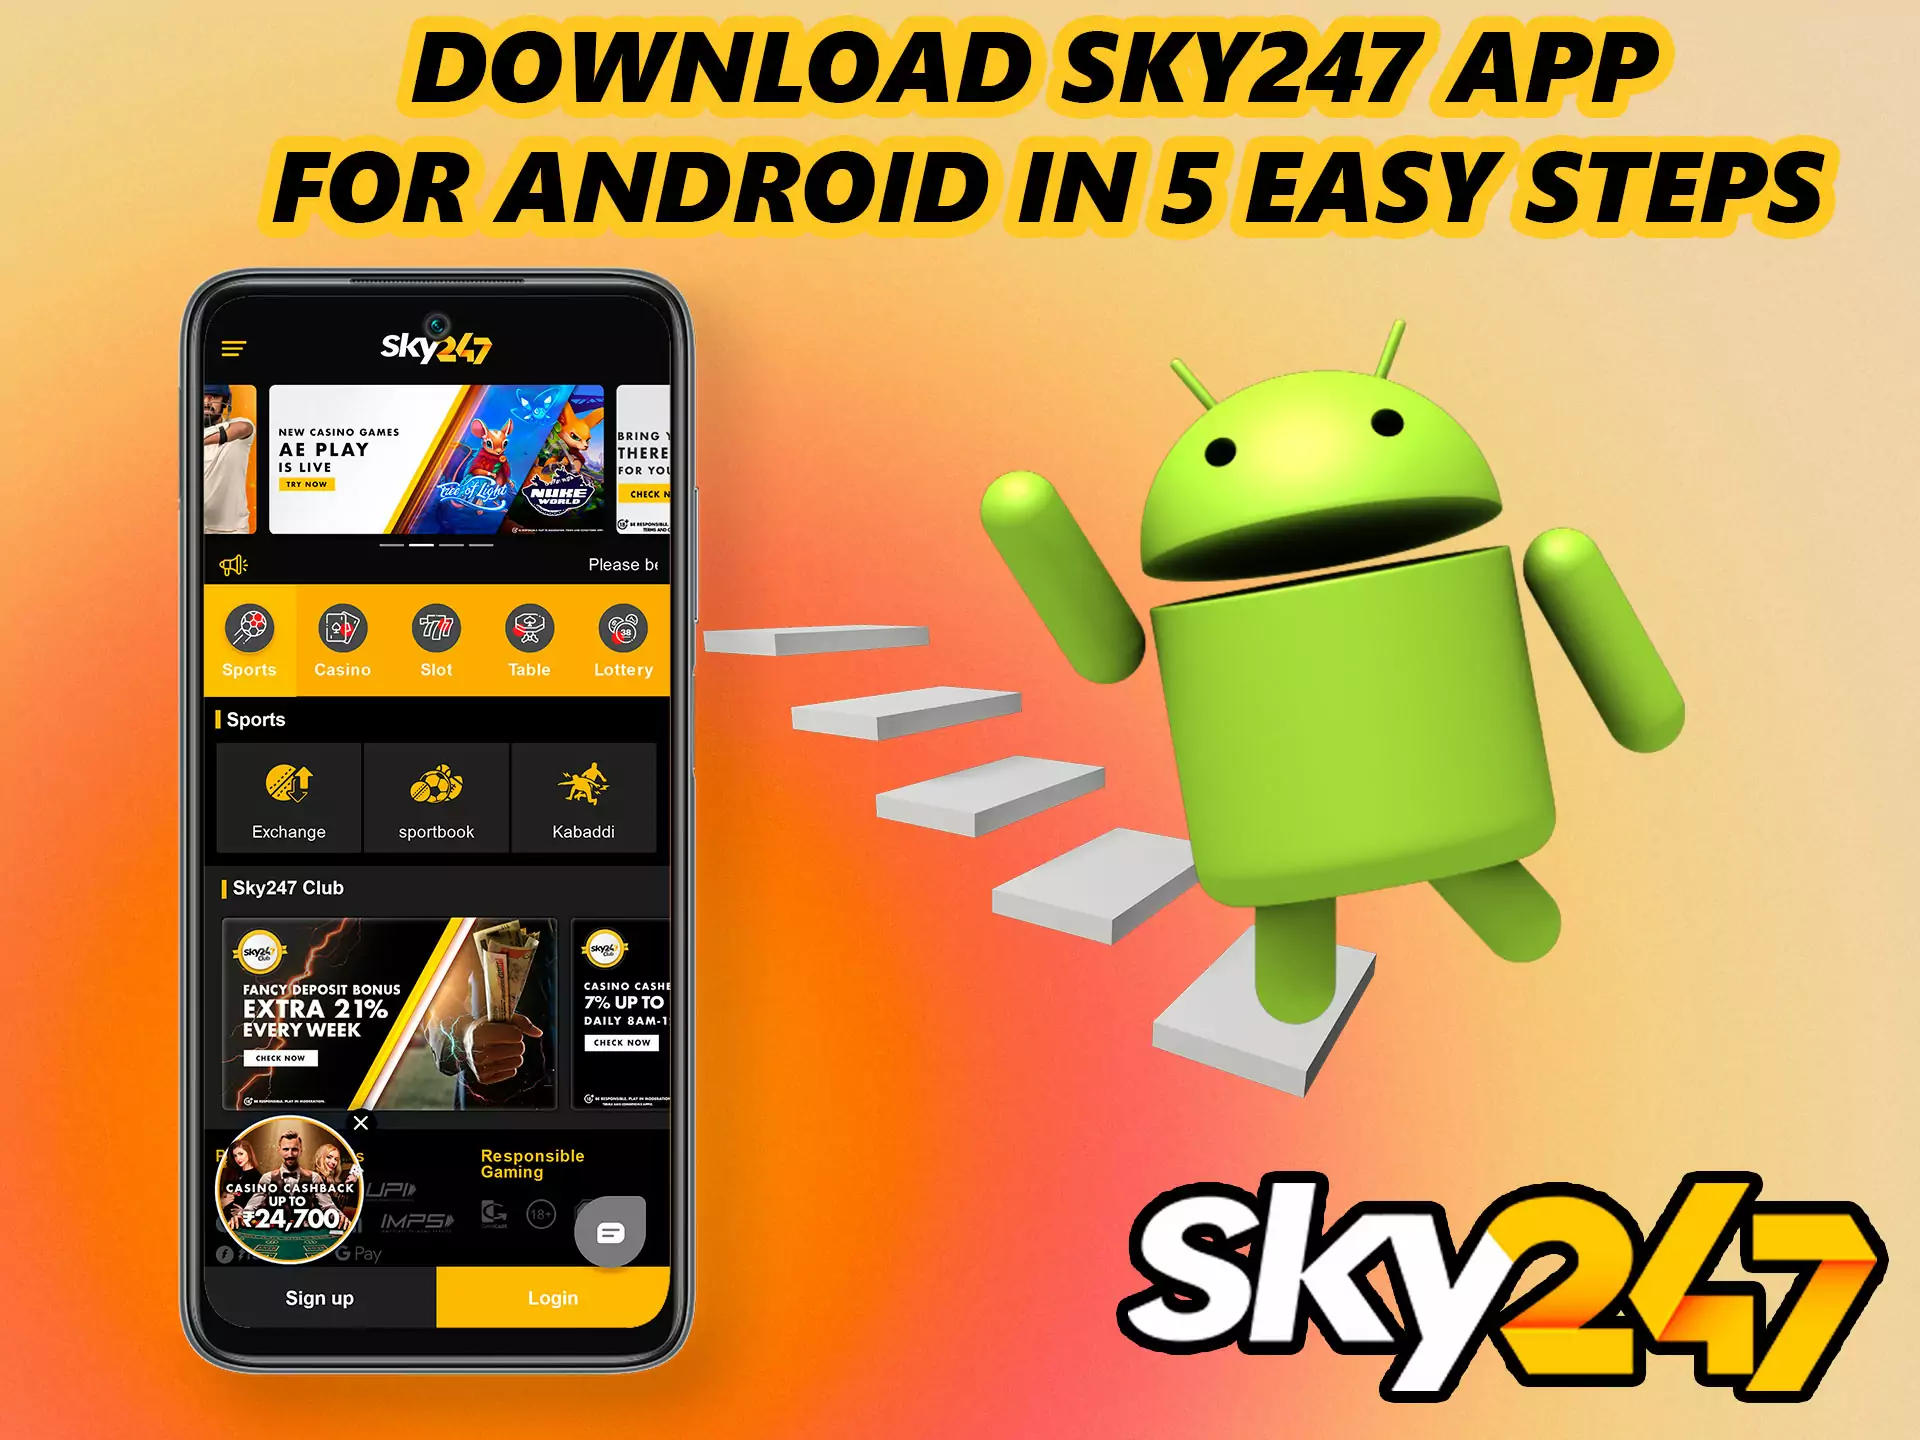 To get the application, you need an .apk file, you can get it on the official website.